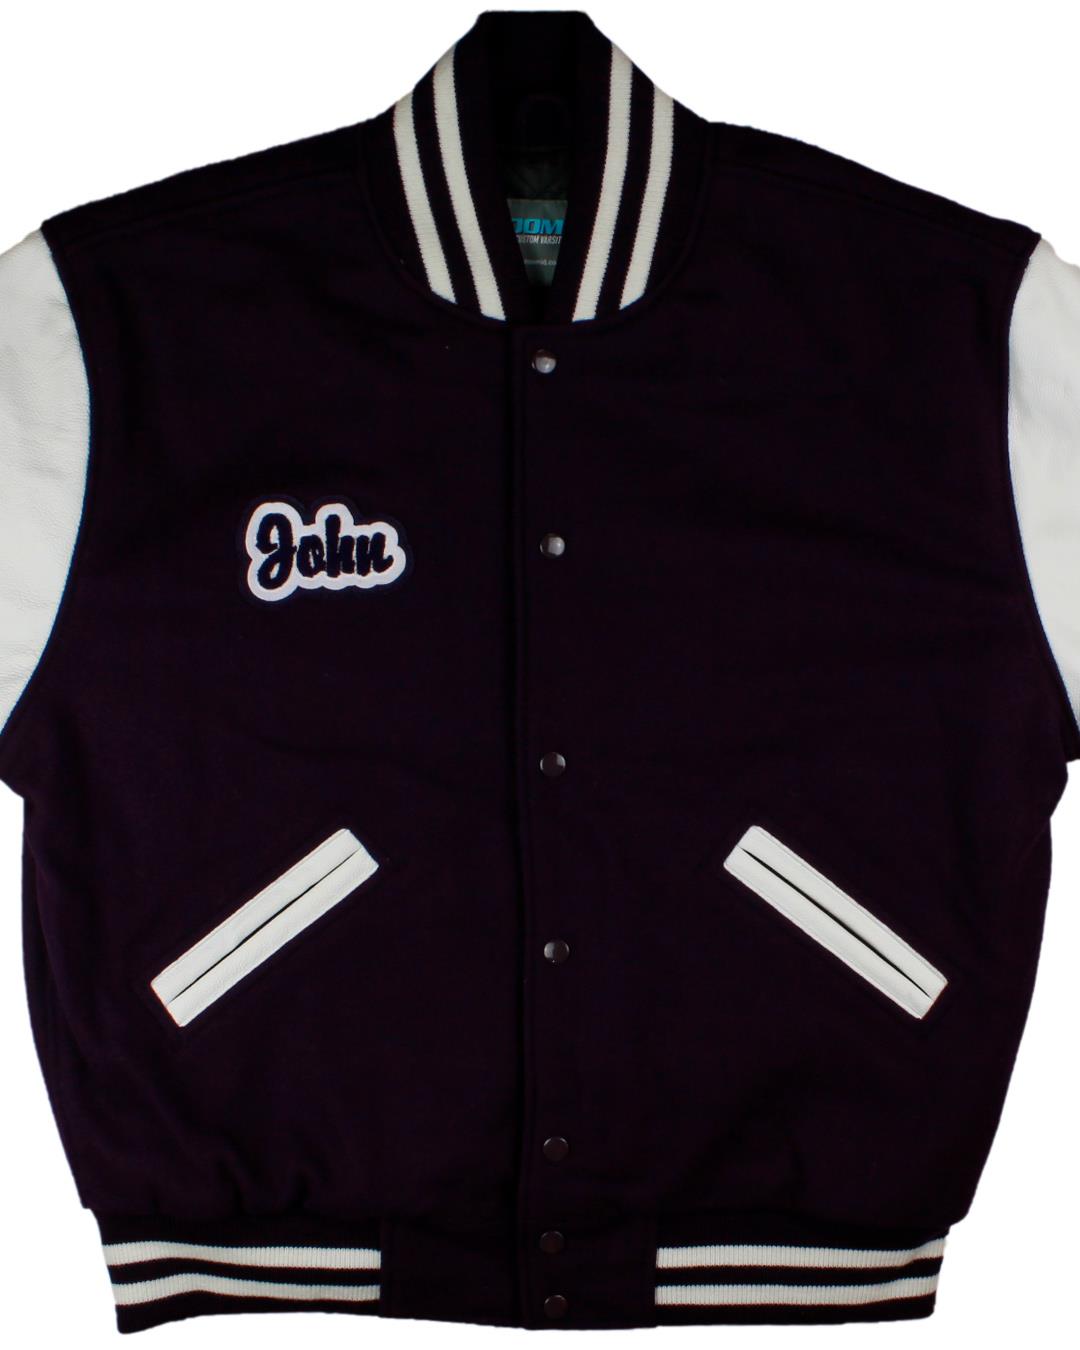 North Thurston High School Letterman, Lacey, WA - Front